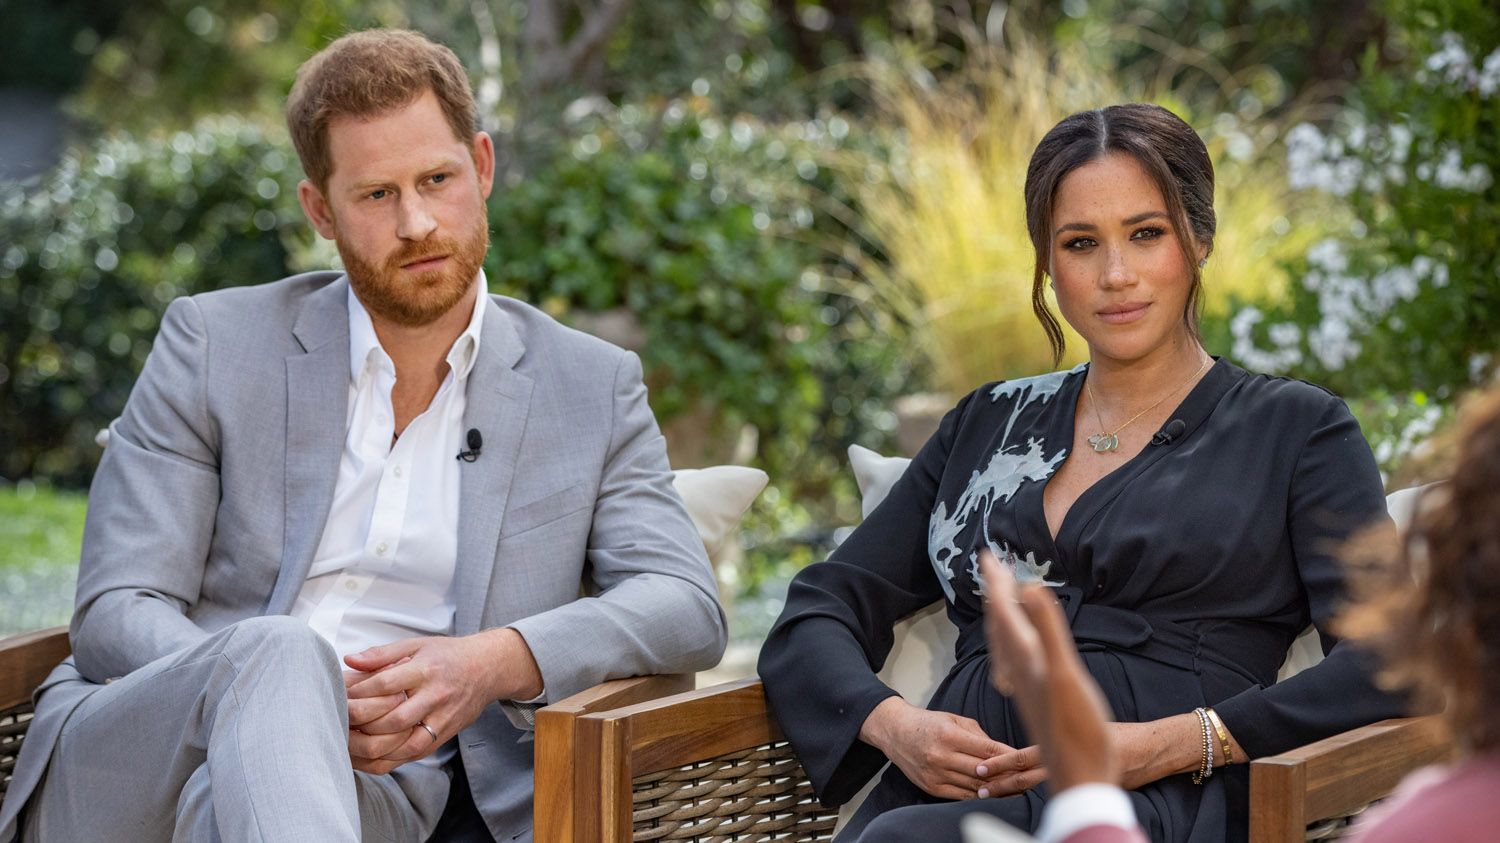 Prince Harry and Meghan Markle are expecting a baby girl